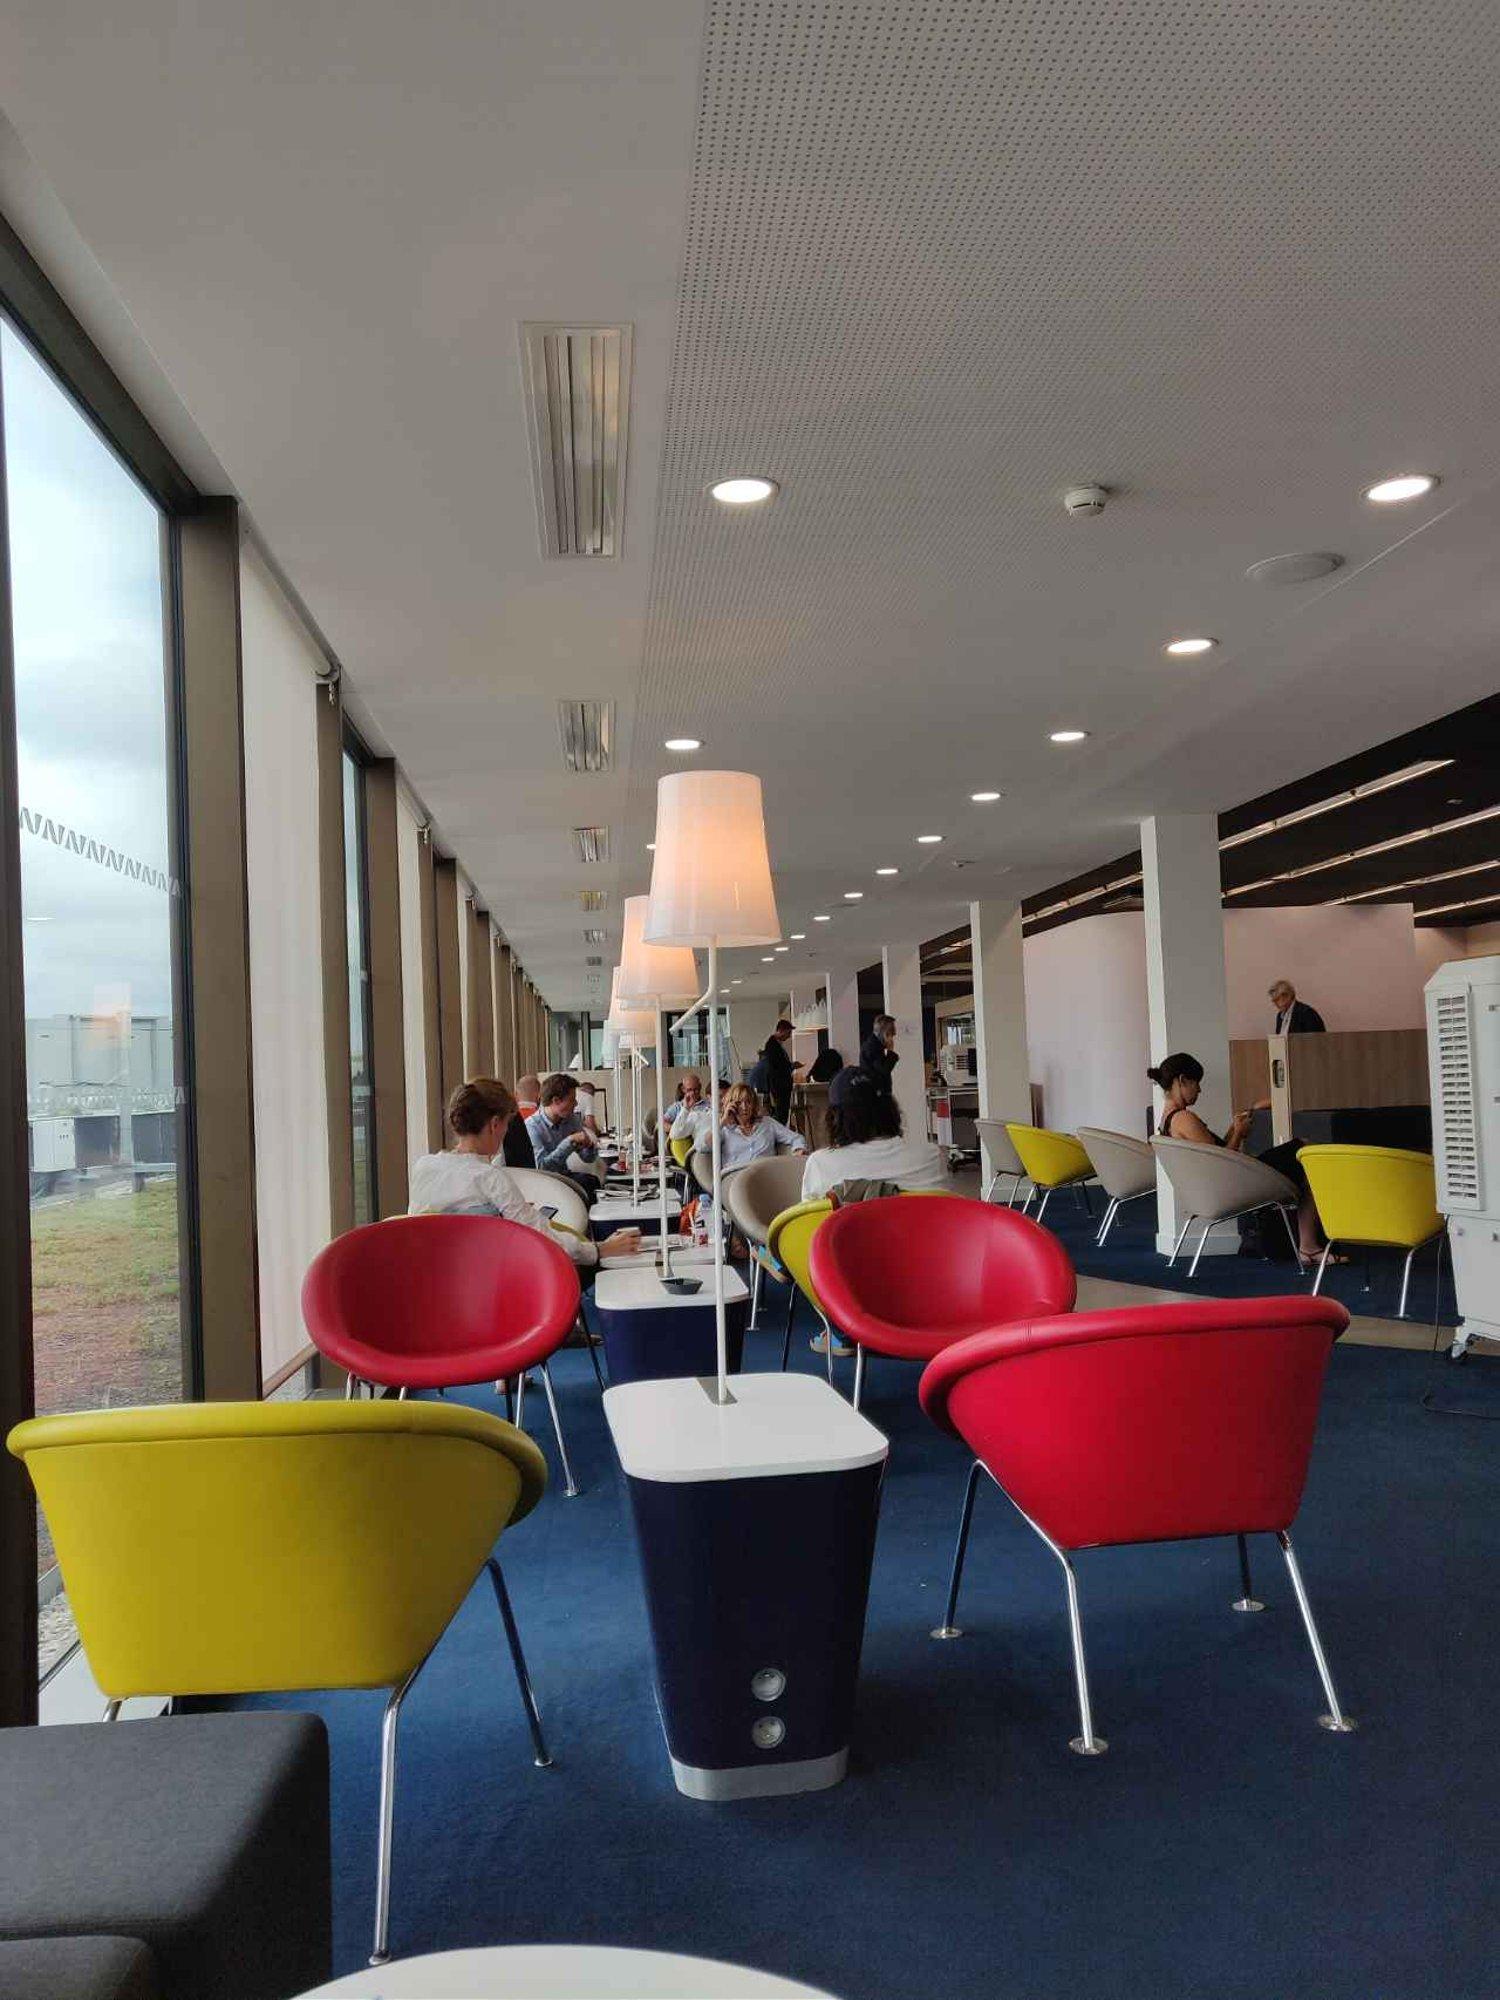 Air France Lounge (Boarding Area B) image 1 of 1